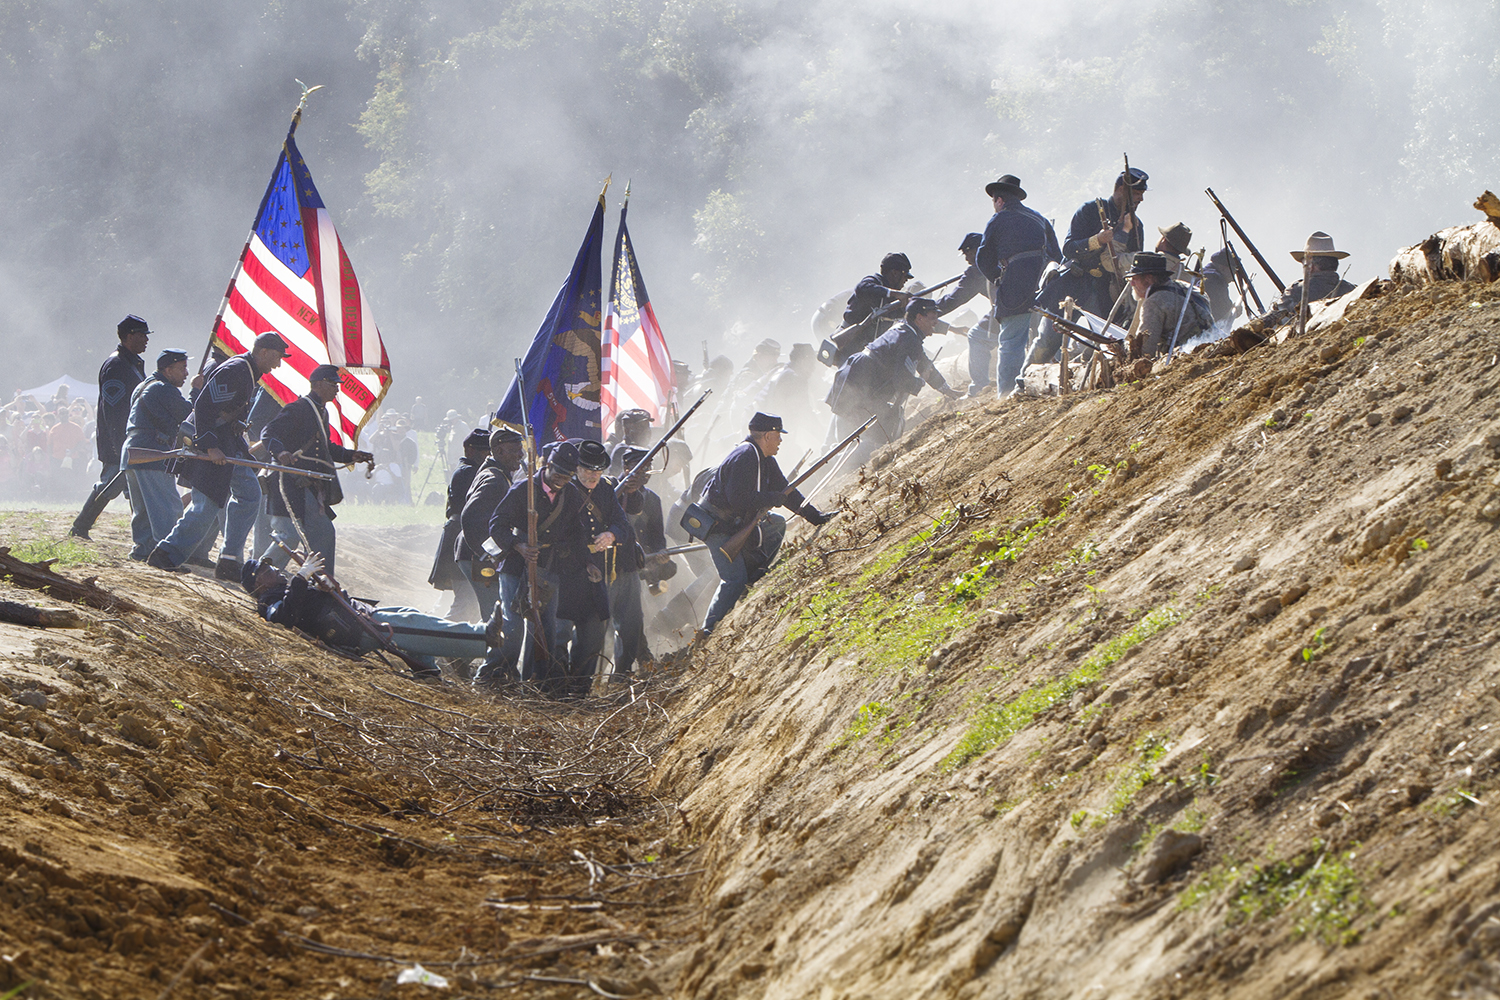  Union troops, including USCT, overrun a Confederate position during a reenactment of the battle of New Market Heights. Henrico, Co., Virginia, September 2014 